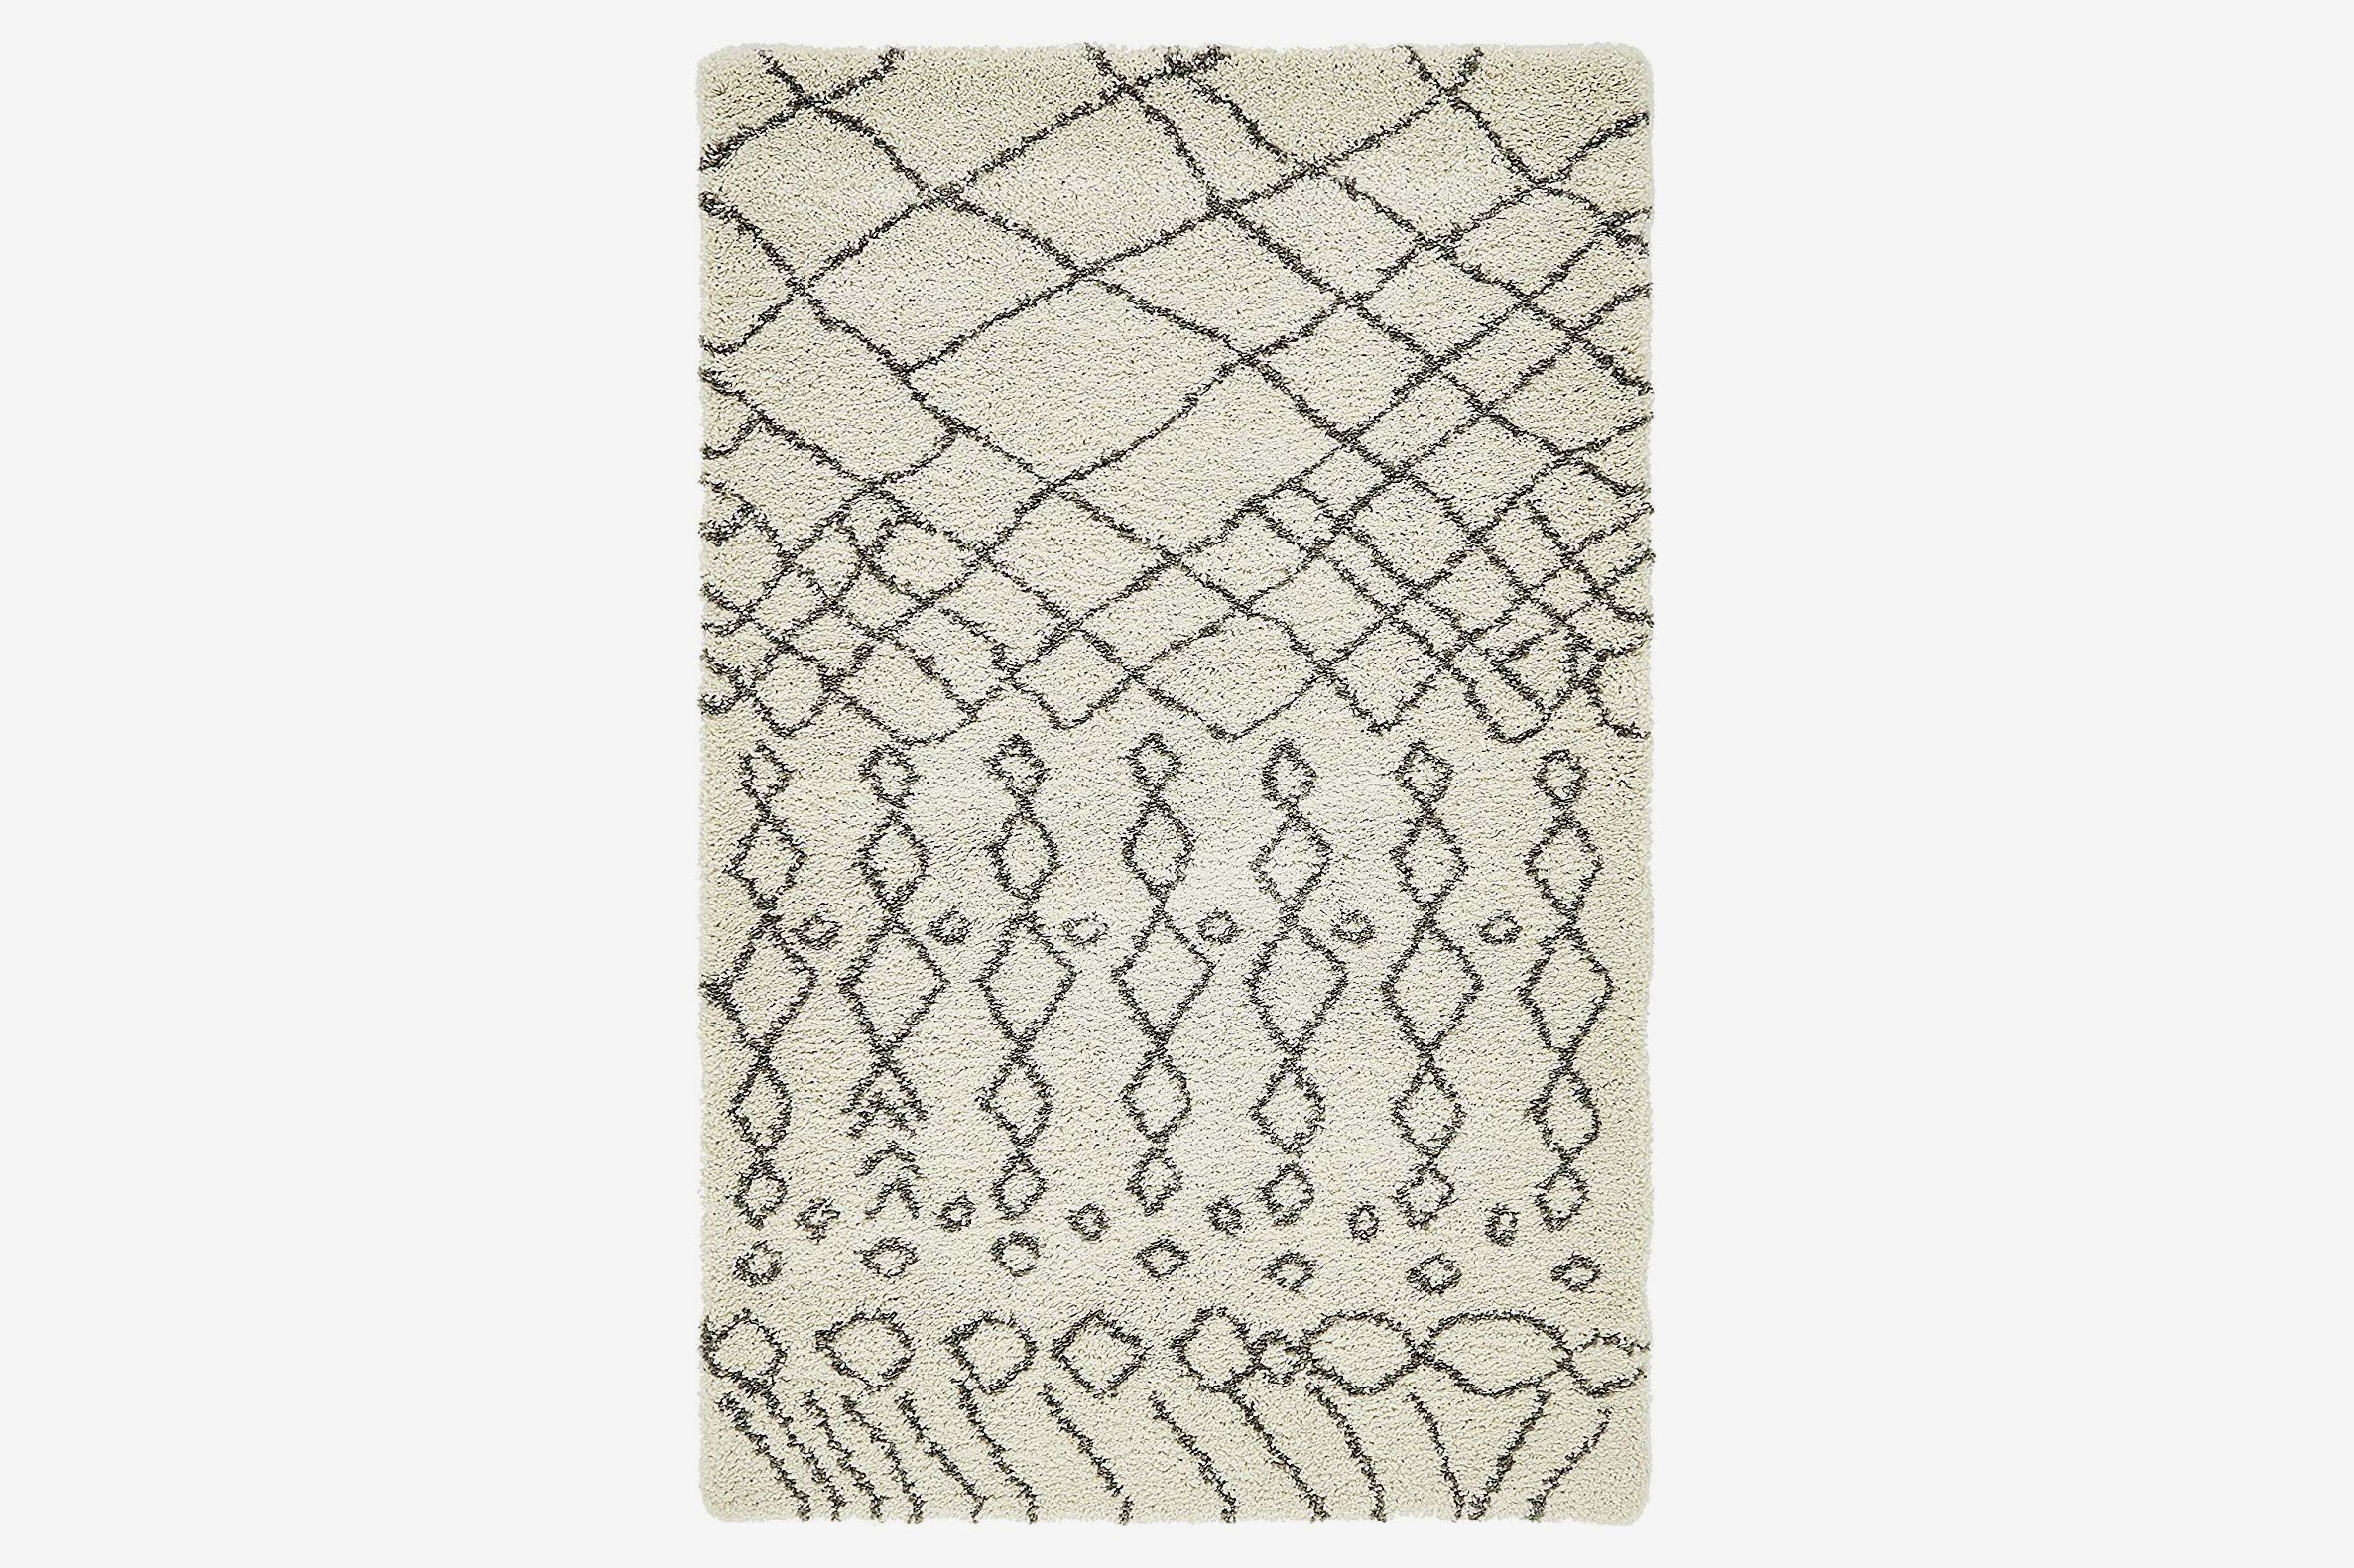 18 Cheap But Expensive-Looking Area Rugs 2019 | The Strategist